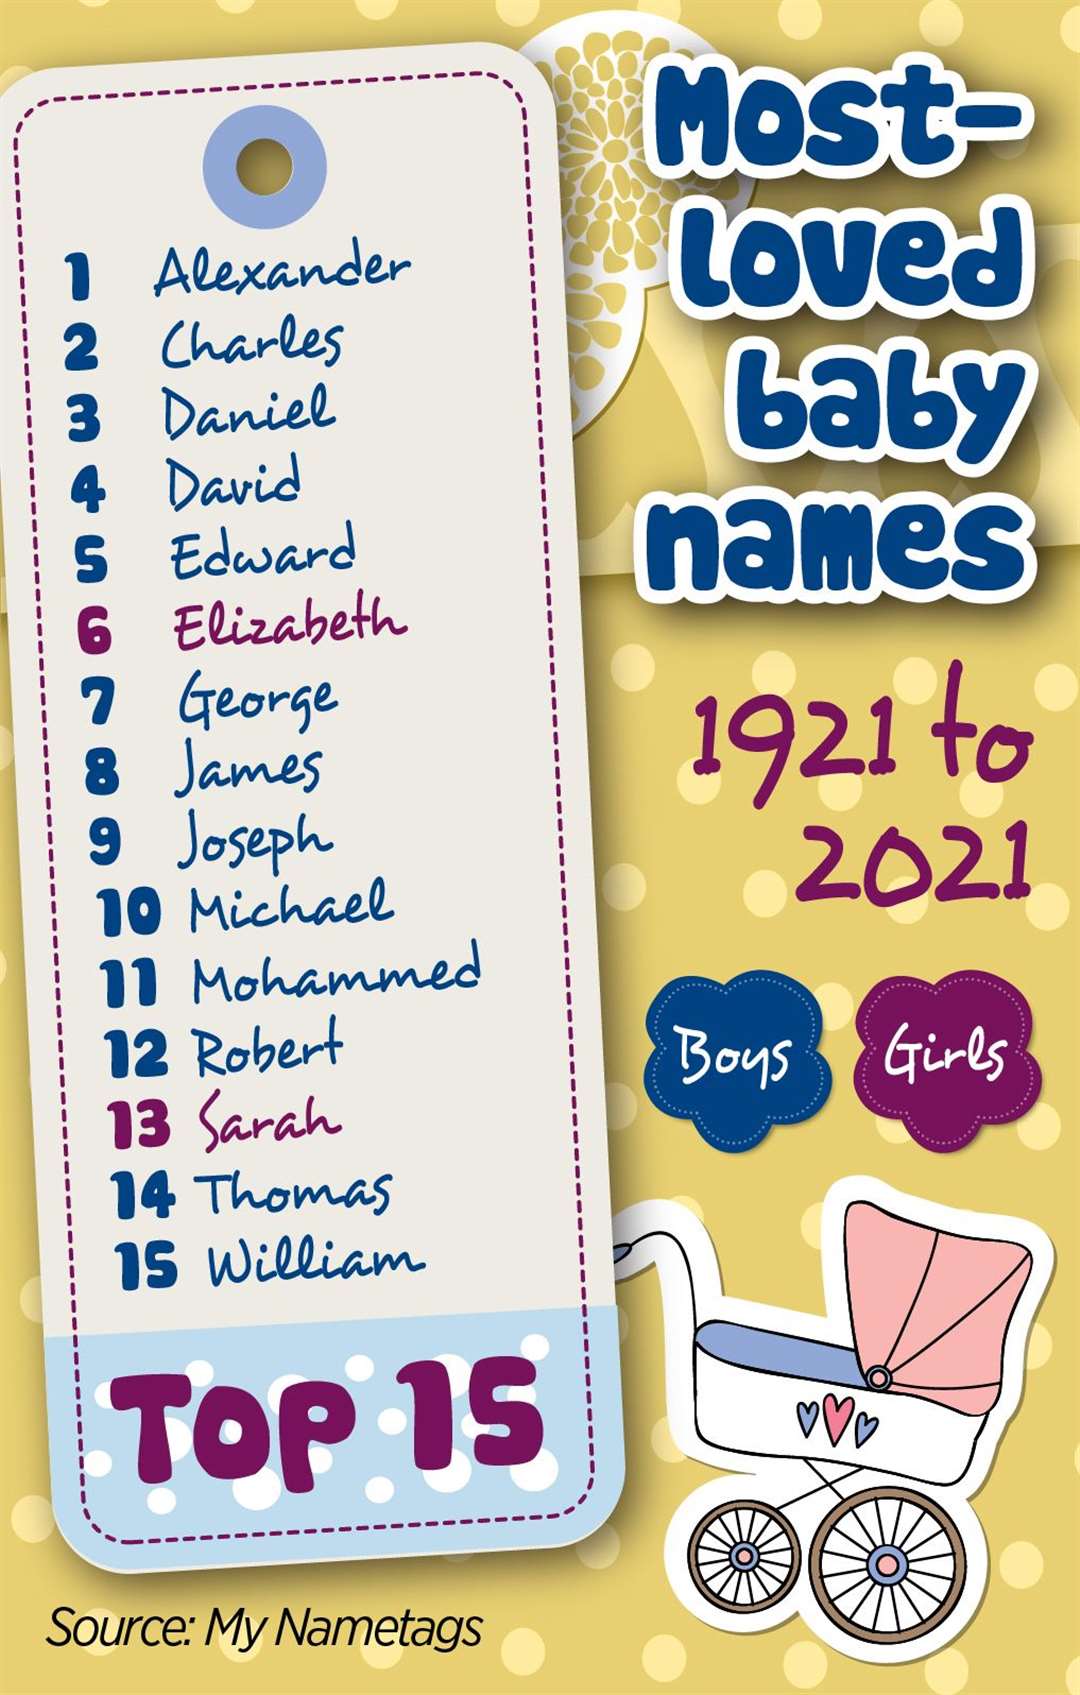 There are 15 names which have remained consistently popular in the last century